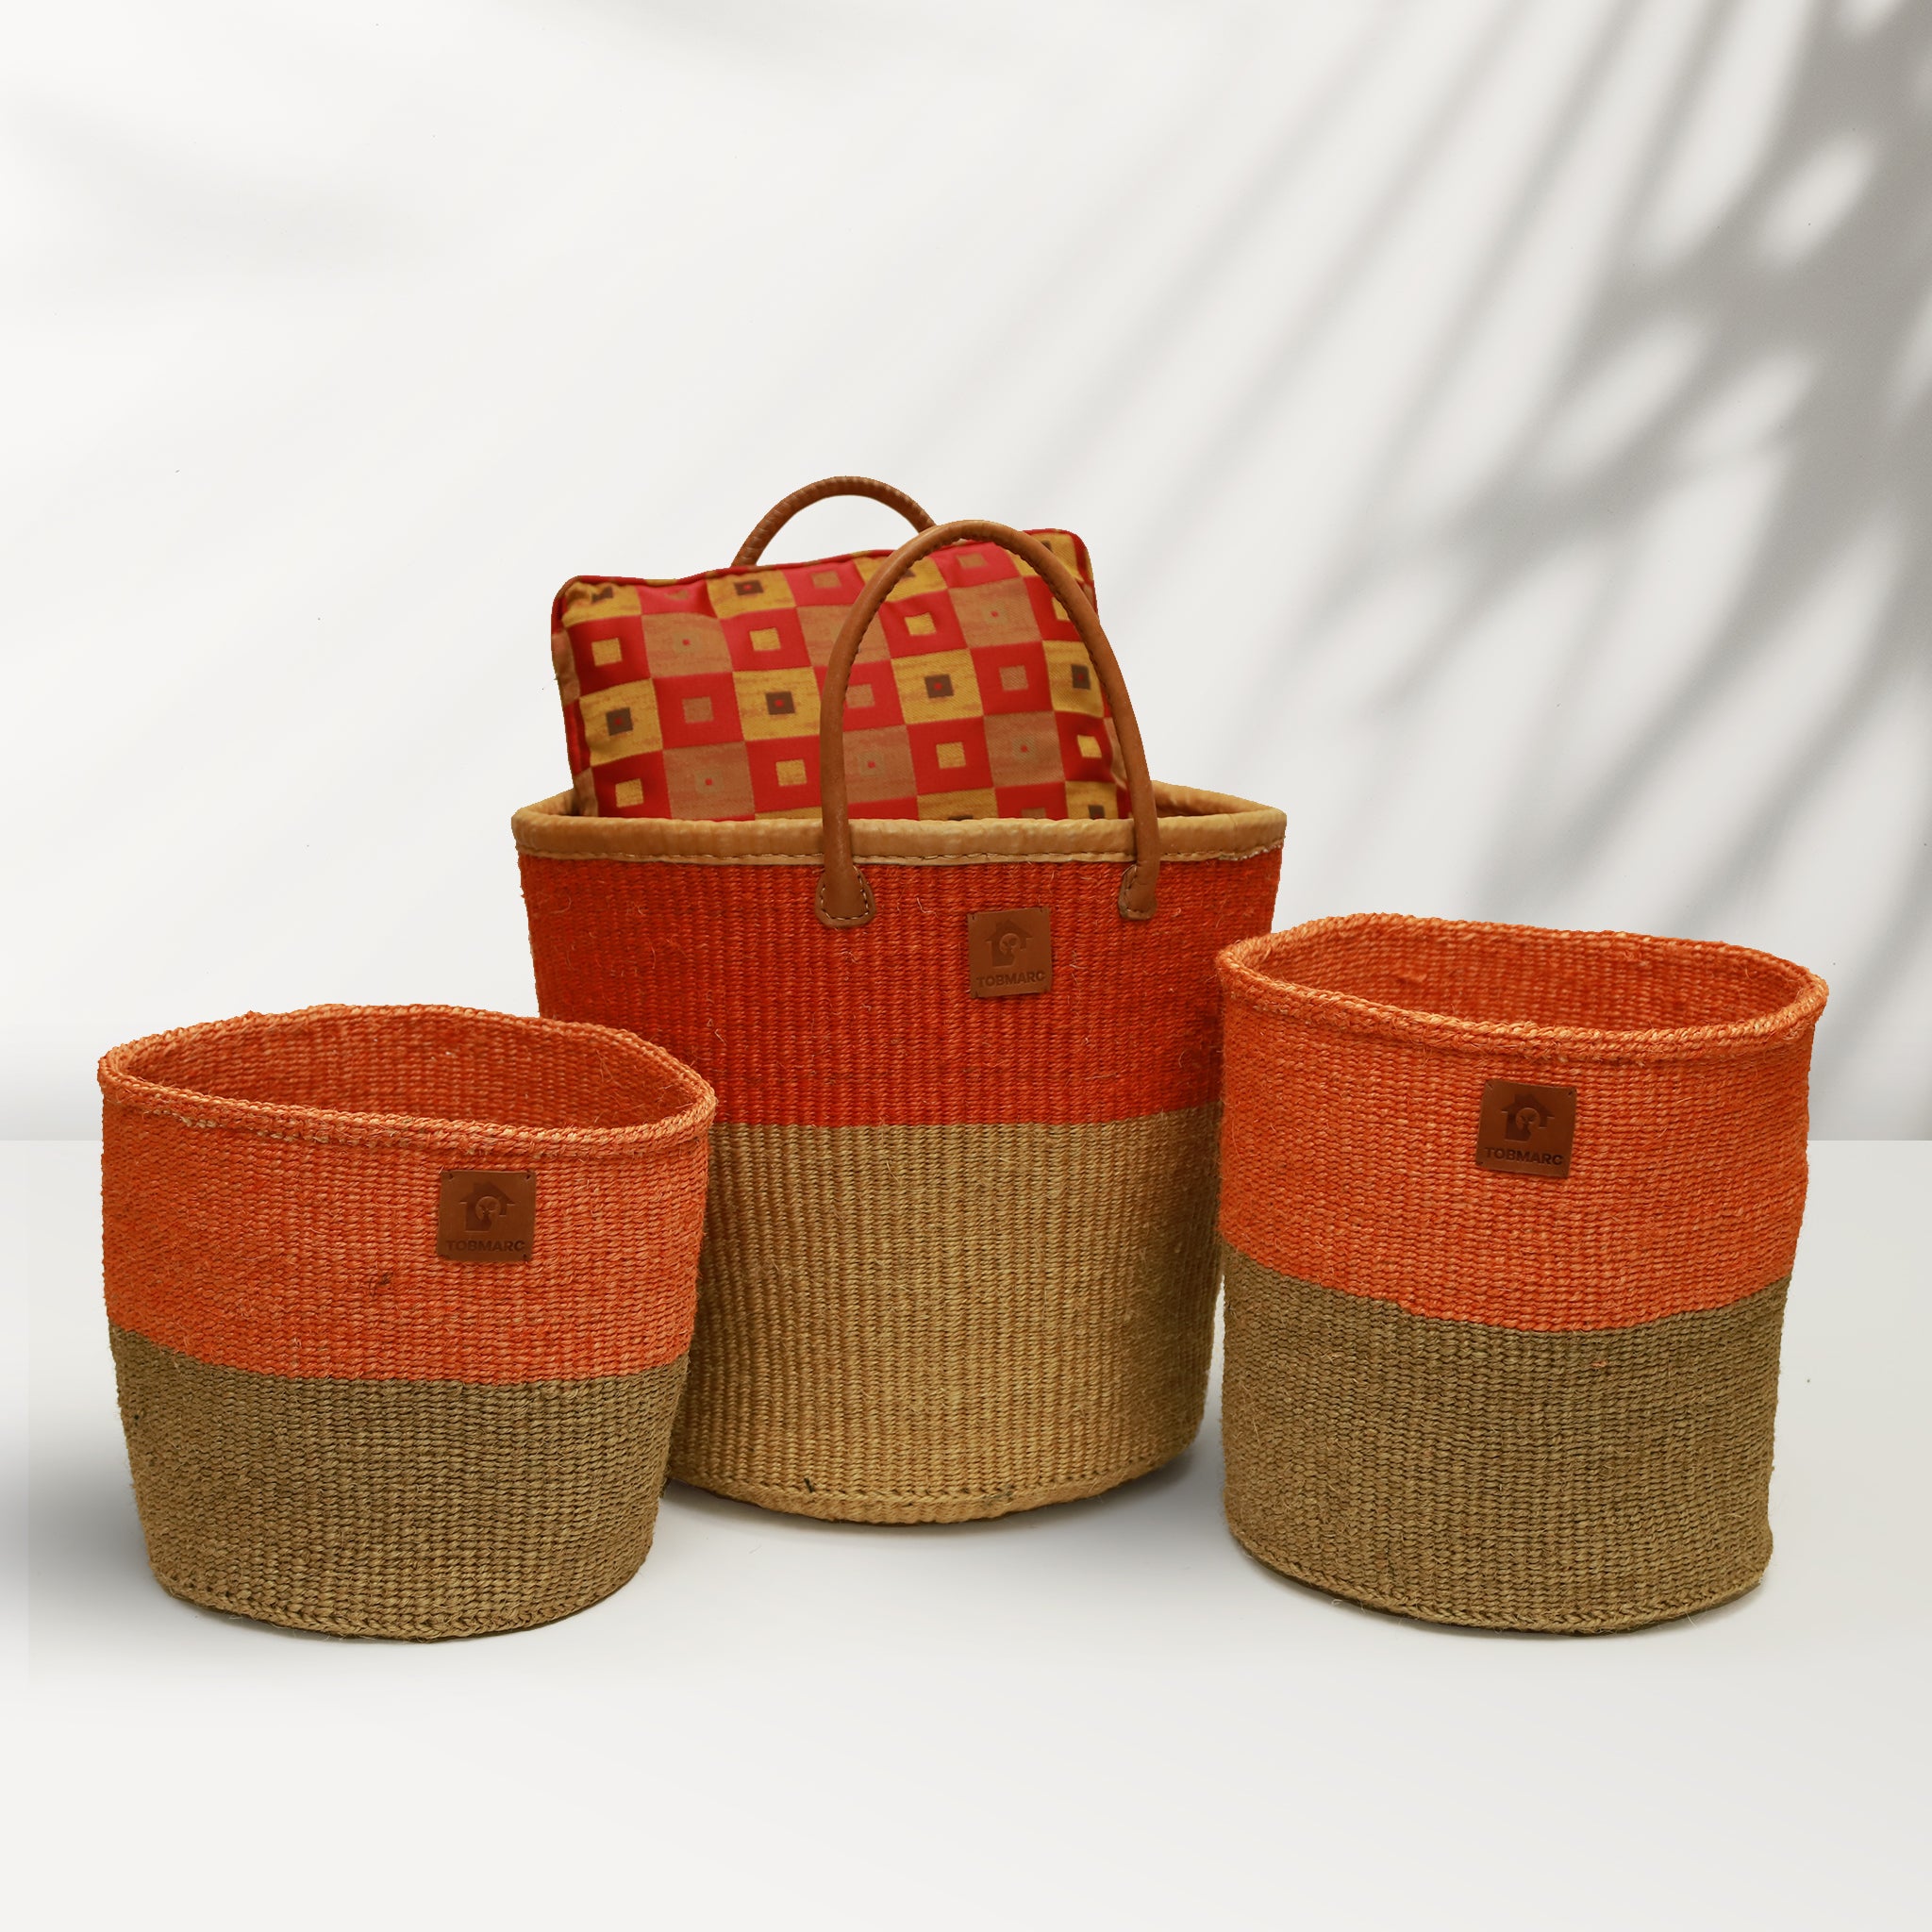 Two-Tone Storage Baskets, Plant Baskets, African Basket Planters, Laundry Basket, Toy Storage Baskets - Tobmarc Home Decor & Gifts 